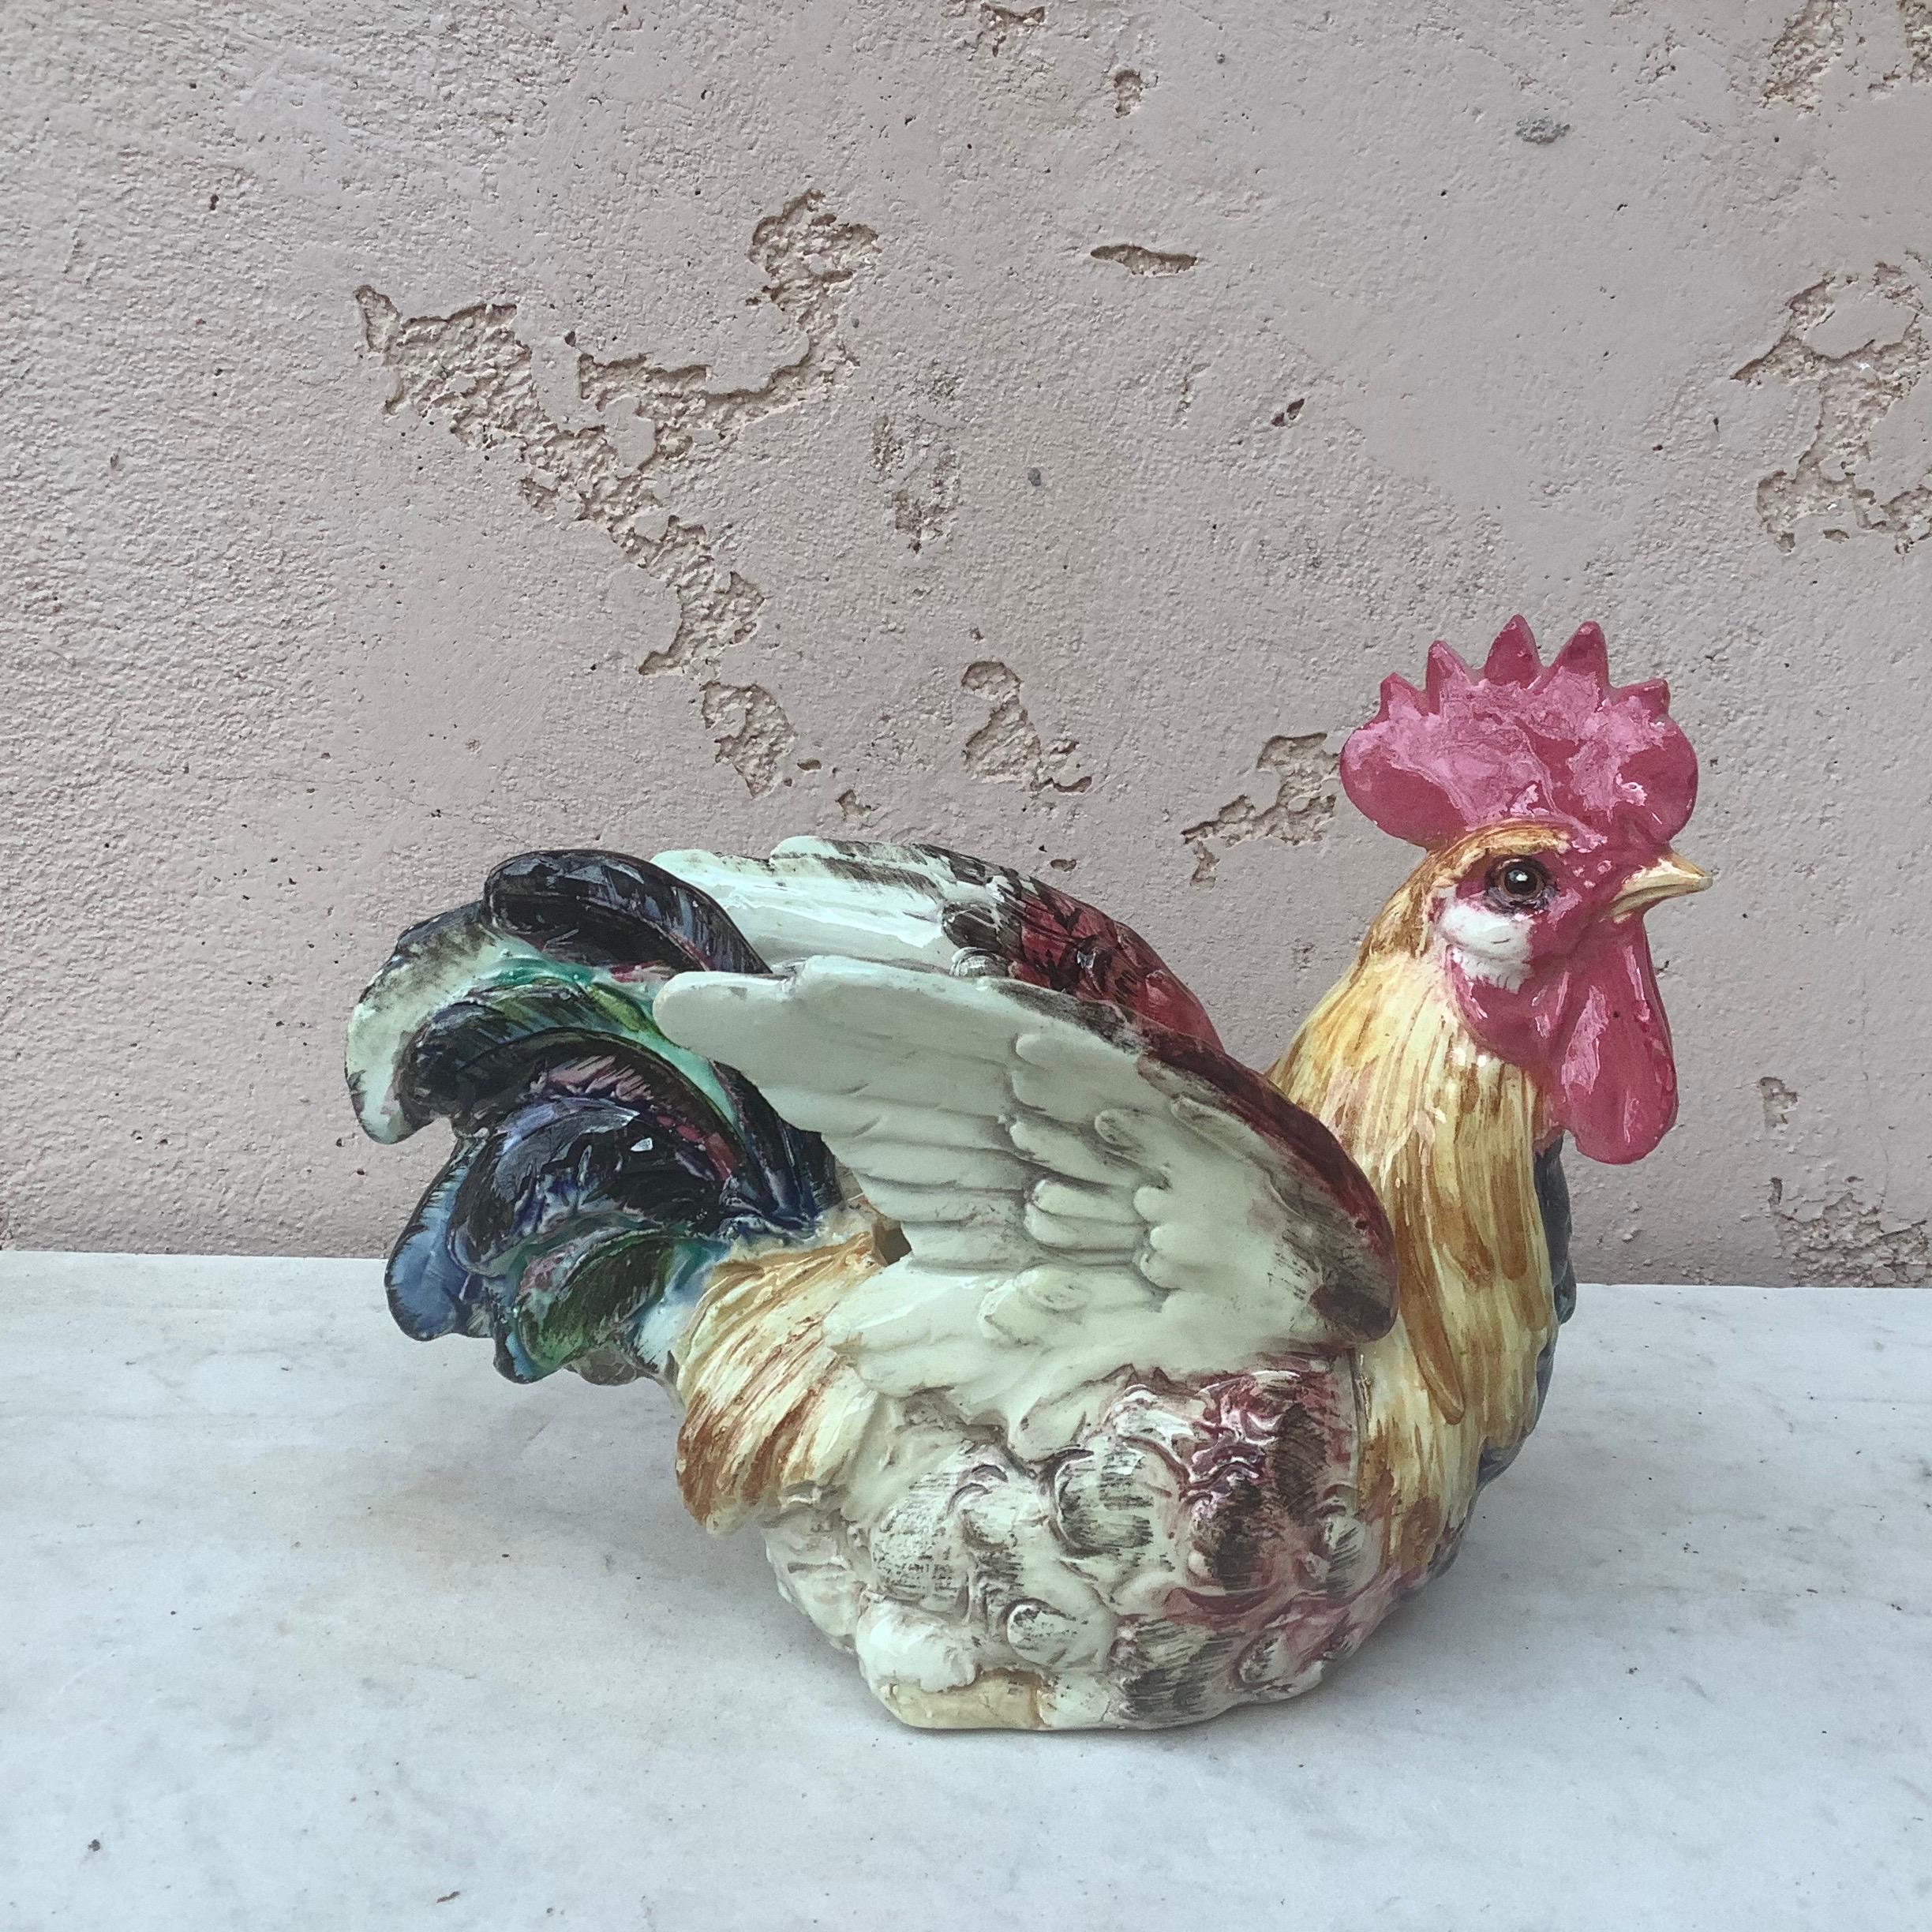 A rare Majolica rooster jardinière signed Delphin Massier, circa 1890.
Country, Rustic style.
Beautiful colors.
Reference / A similar example of this piece page 93 